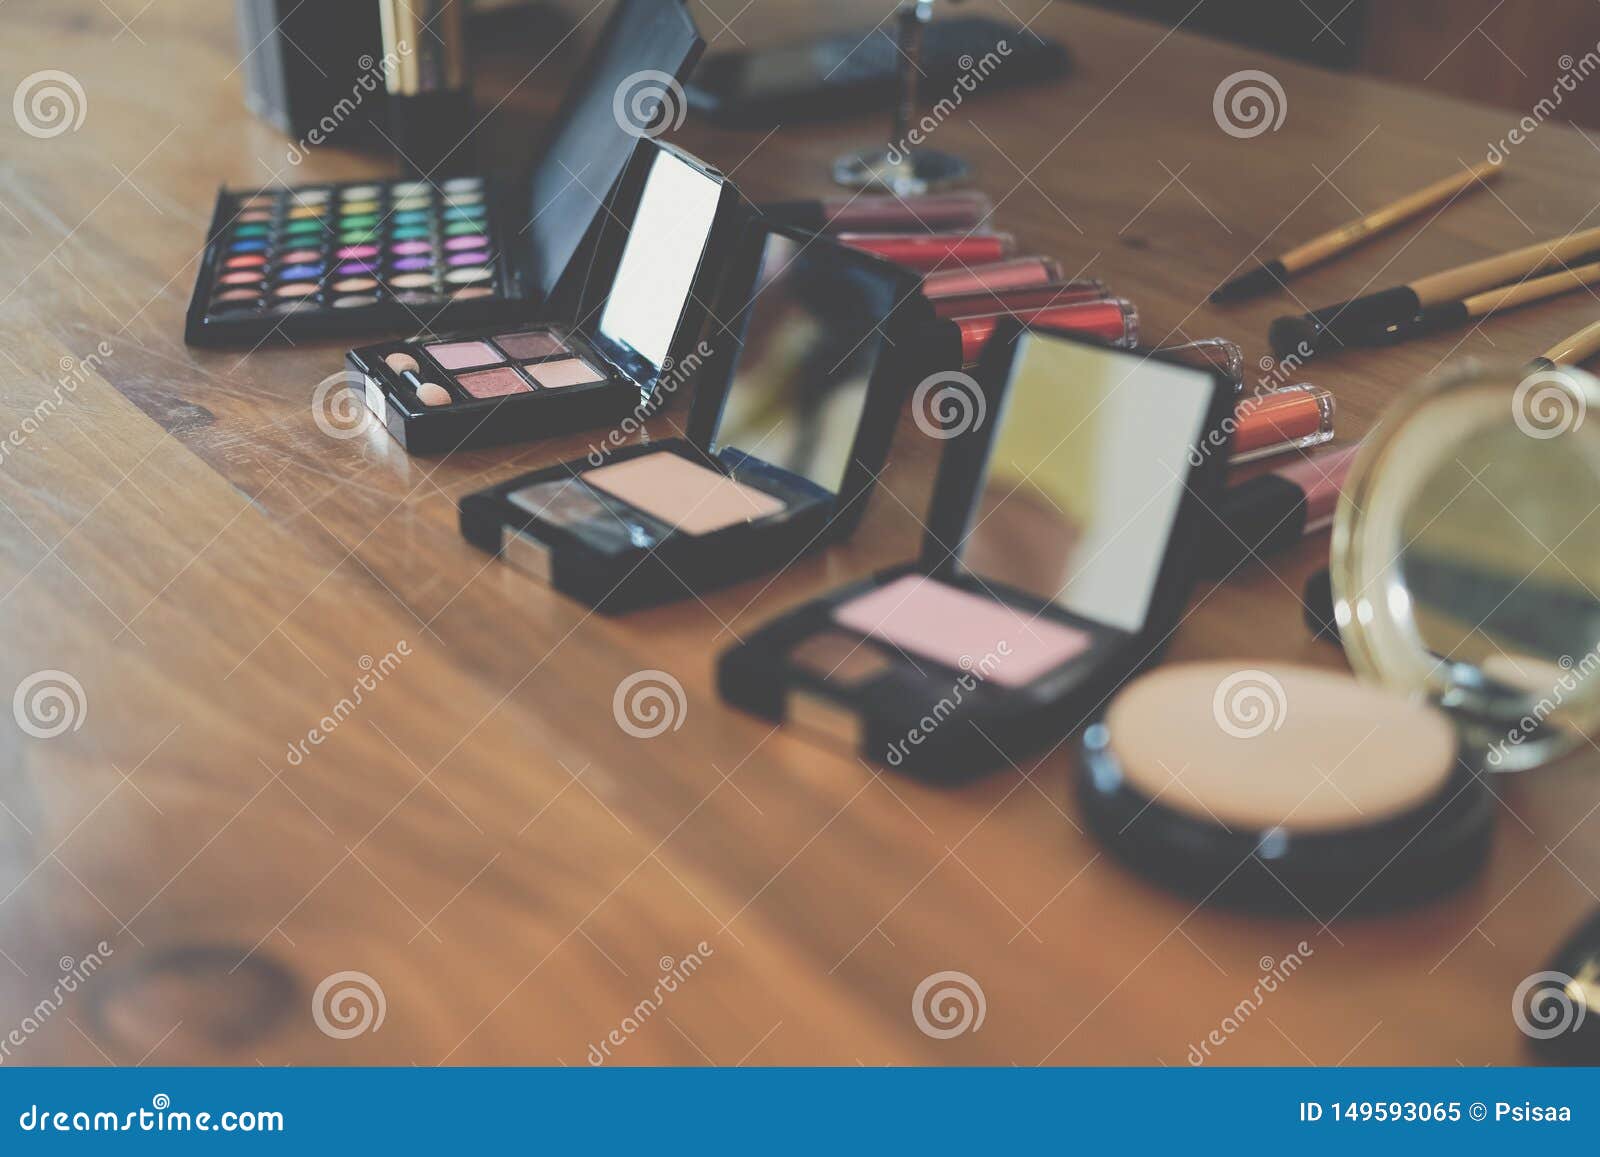 Beauty Cosmetic Makeup Essentials on Stylish Artist Table Stock Image ...